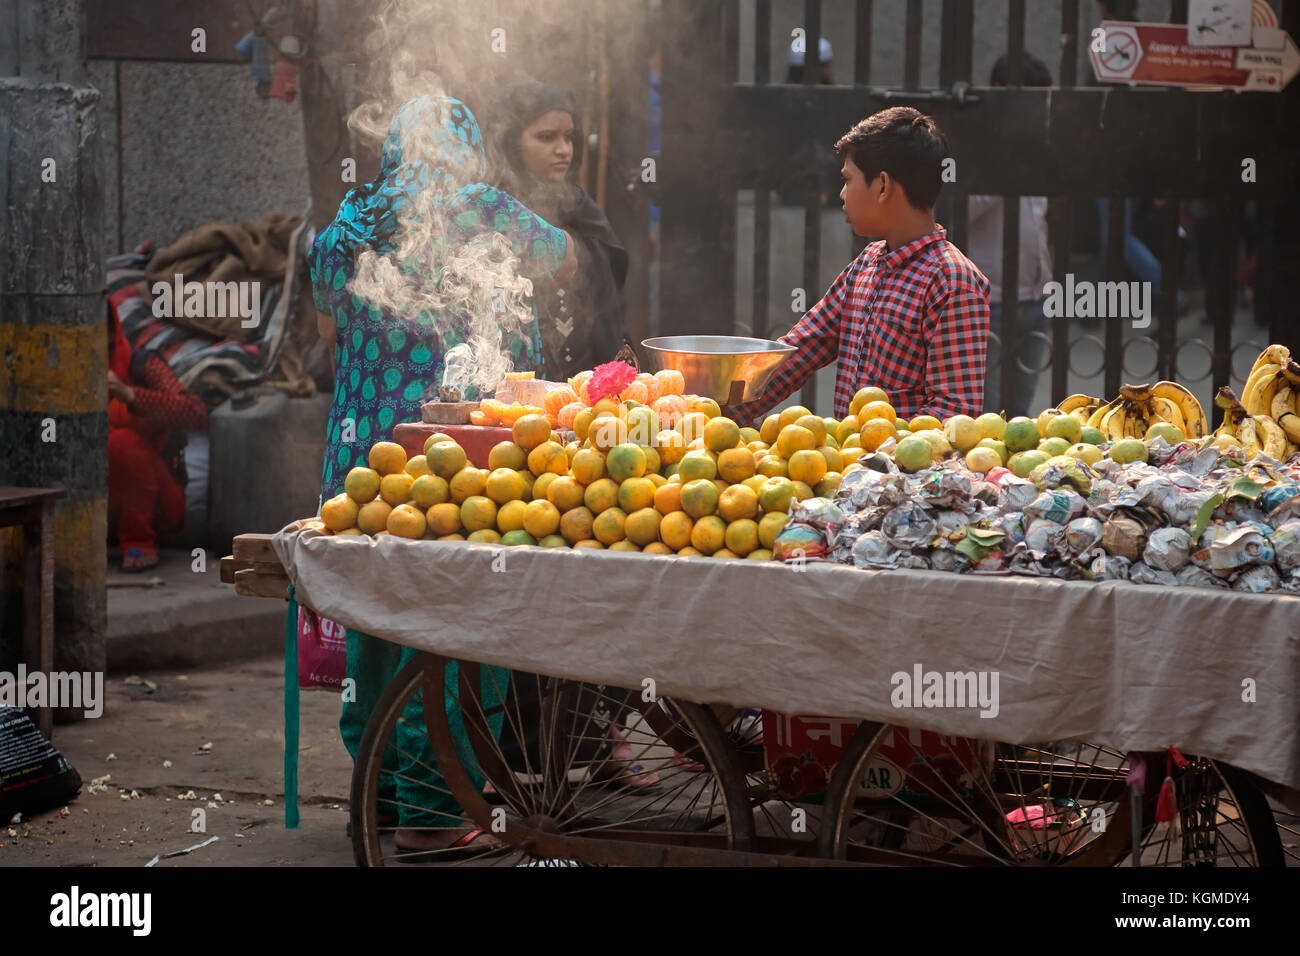 Delhi, India - November 20, 2015: An Indian boy selling his fresh produce on a crowded street market of Old Deli Stock Photo